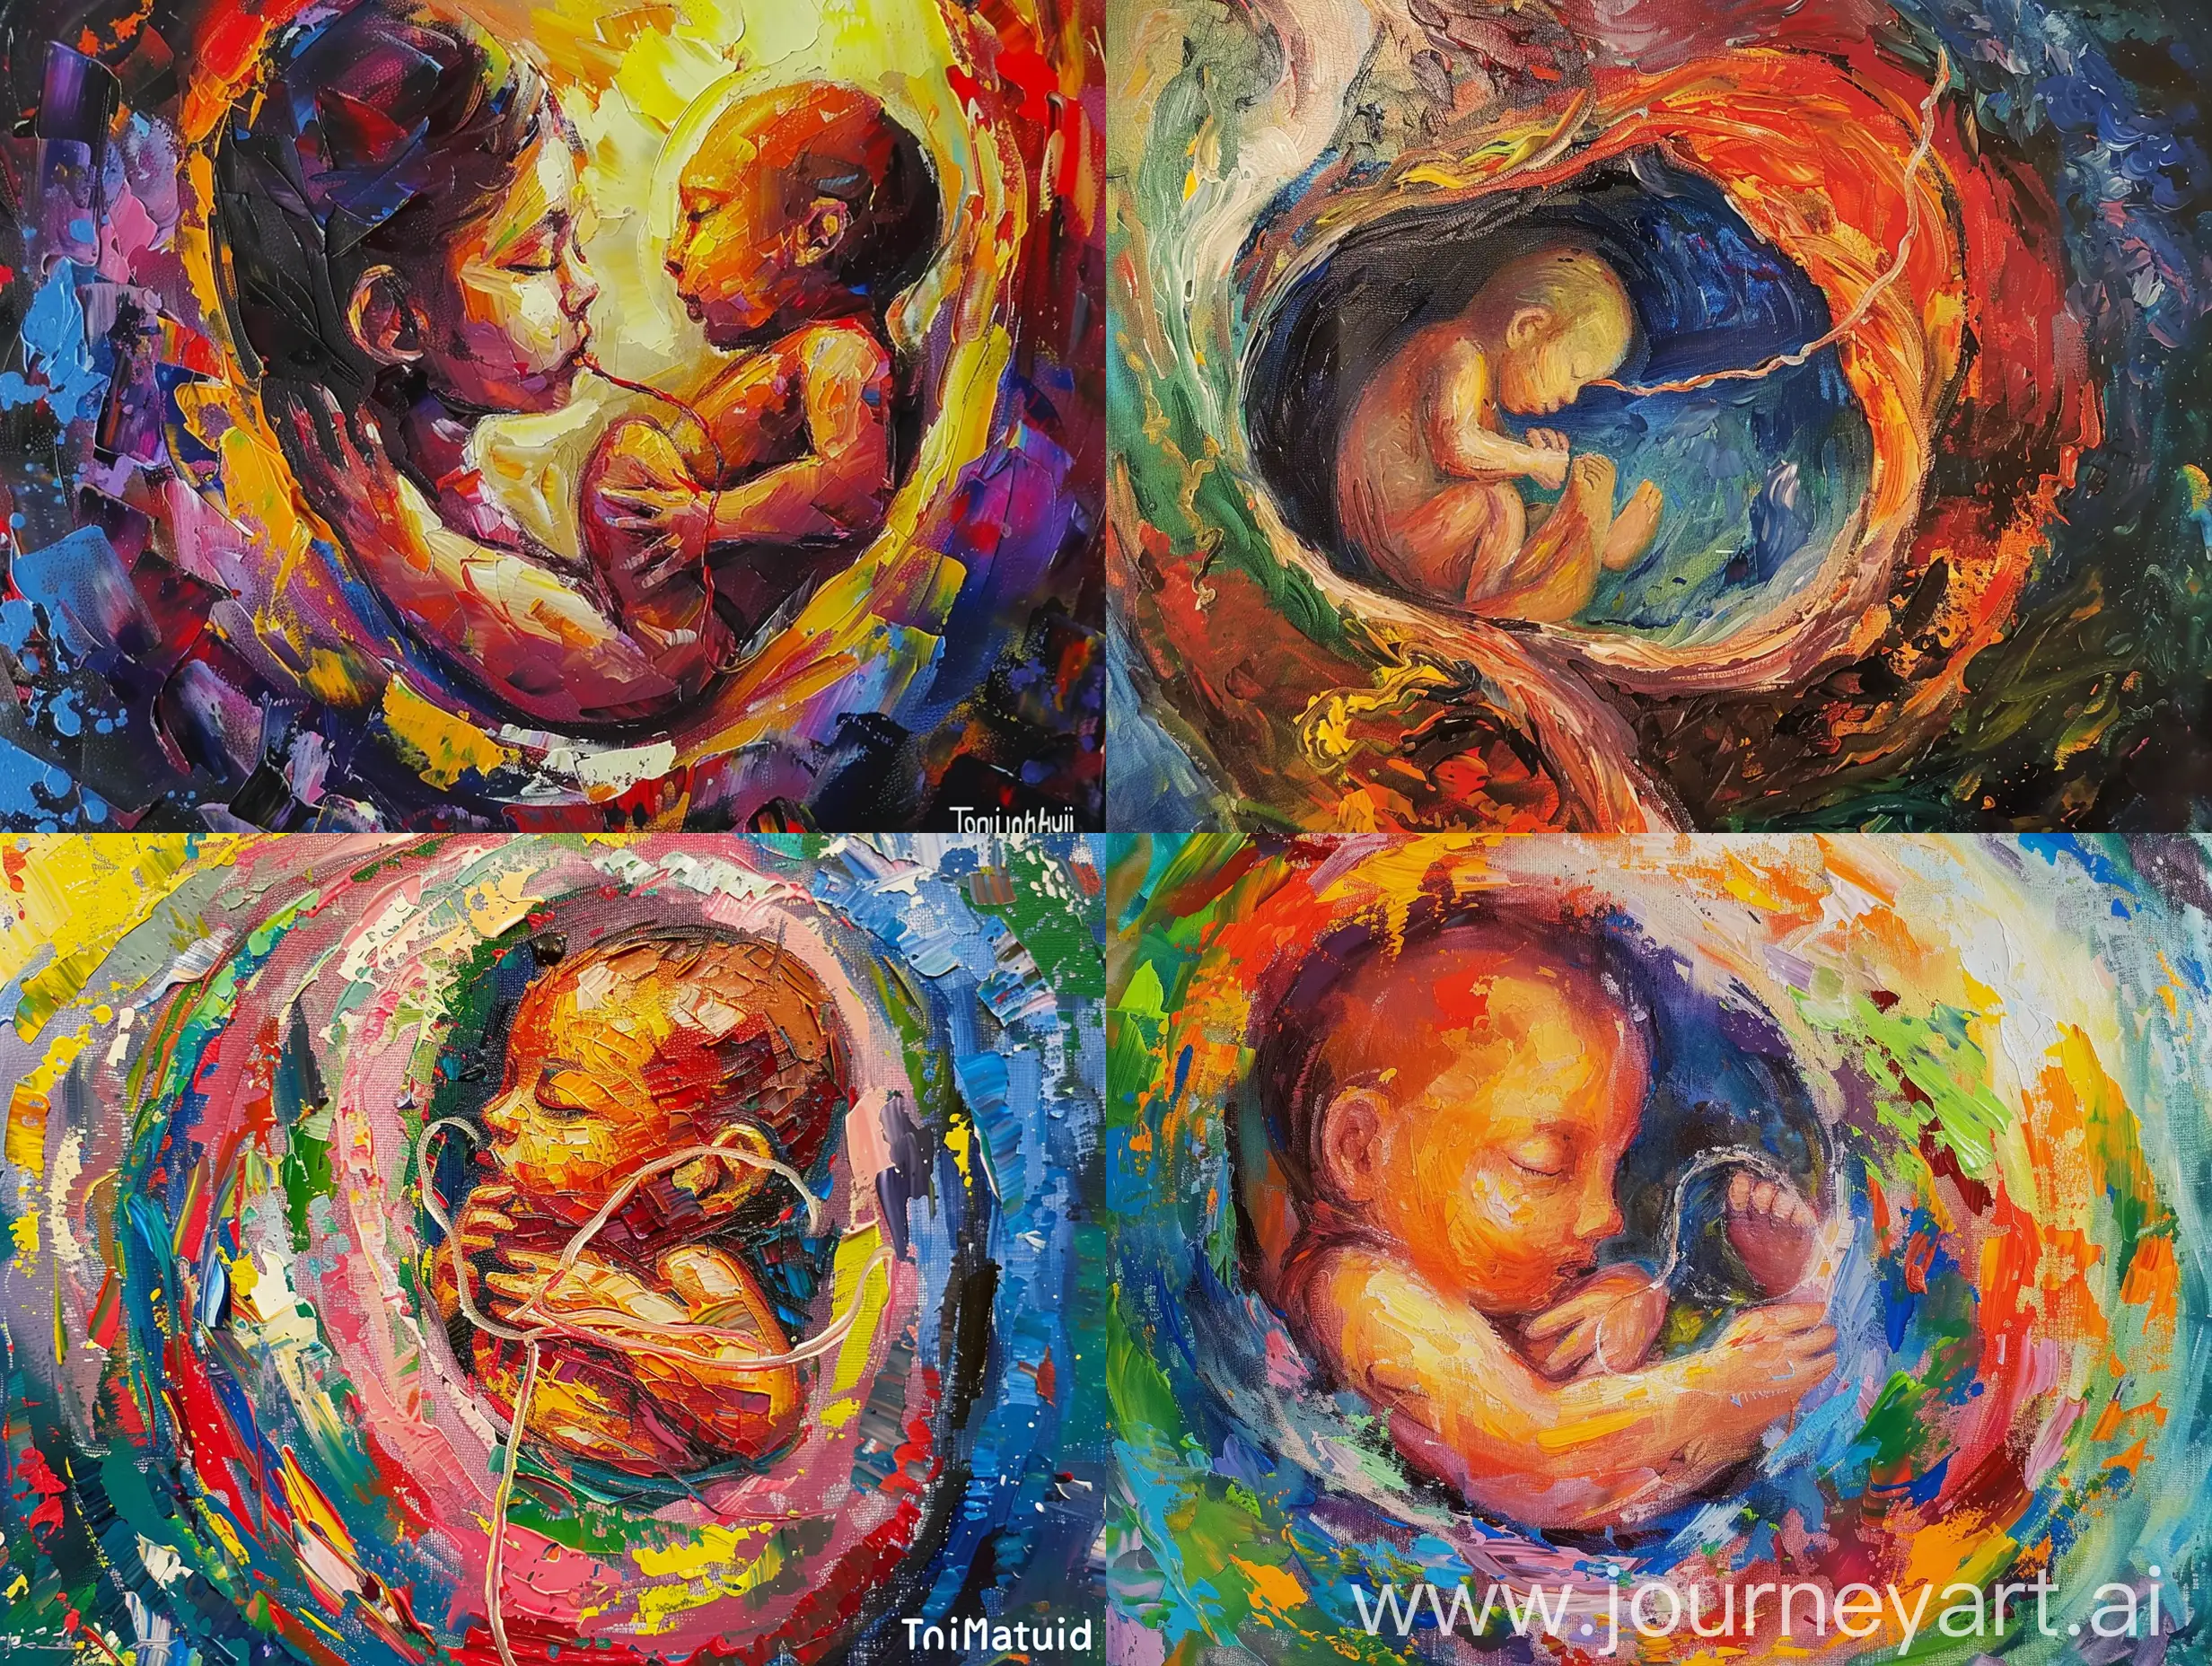 Oil painting of a baby inside its mother painted with its umbilical cord connected with its mother in an impressionate style of toni mahfud painting style, conceptual art, painting with bright colours.